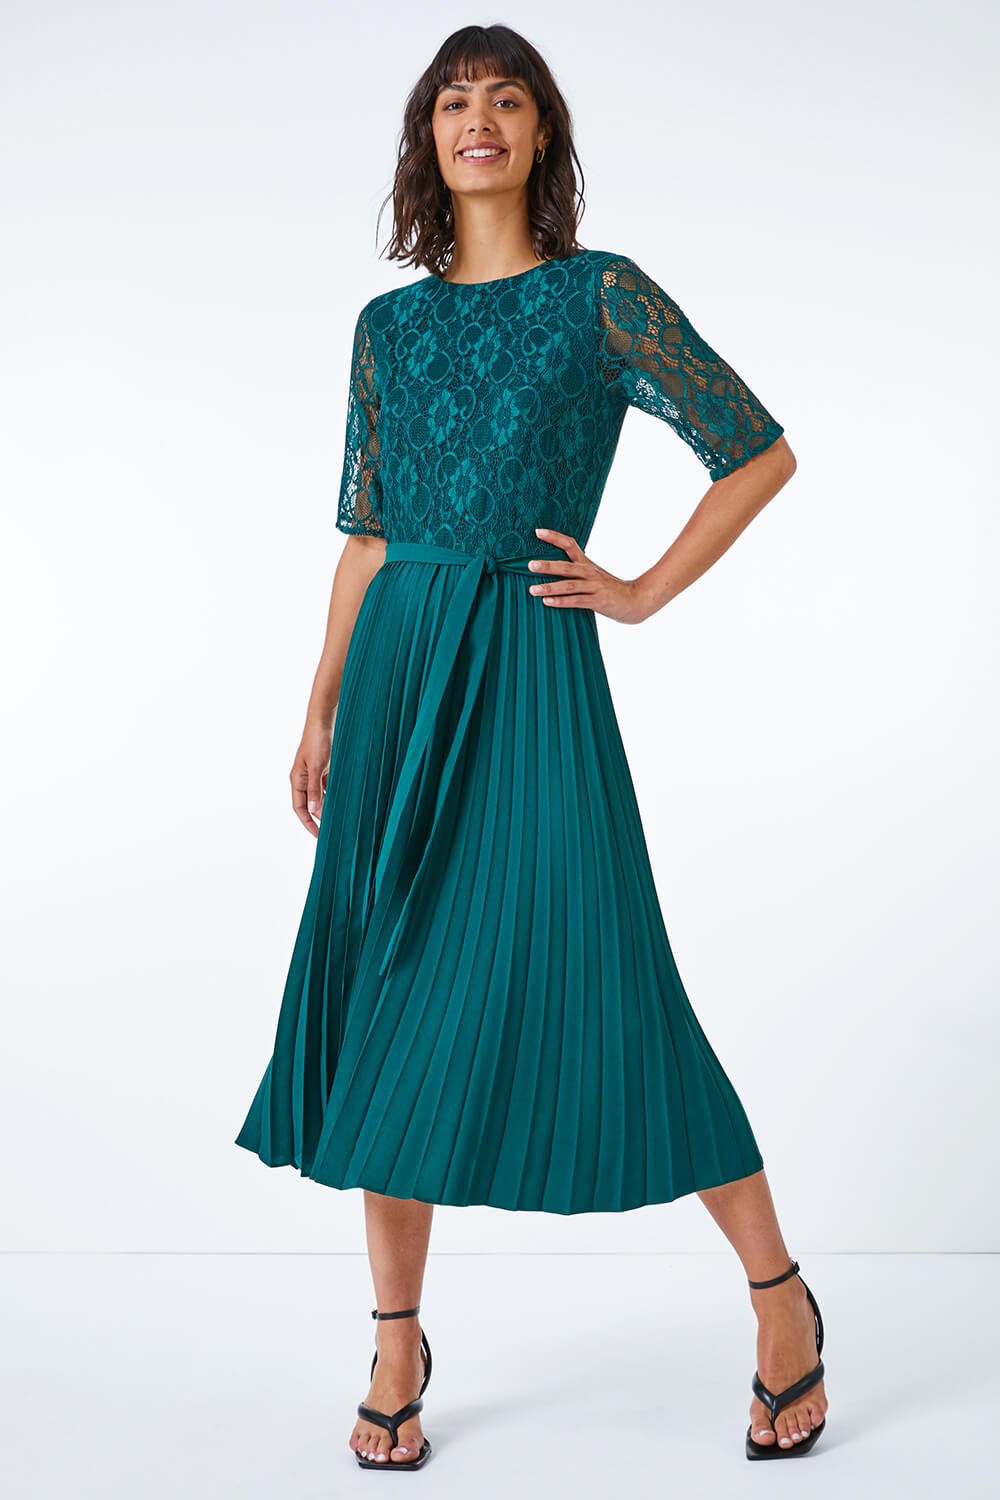 Green Lace Pleated Midi Dress, Image 2 of 5